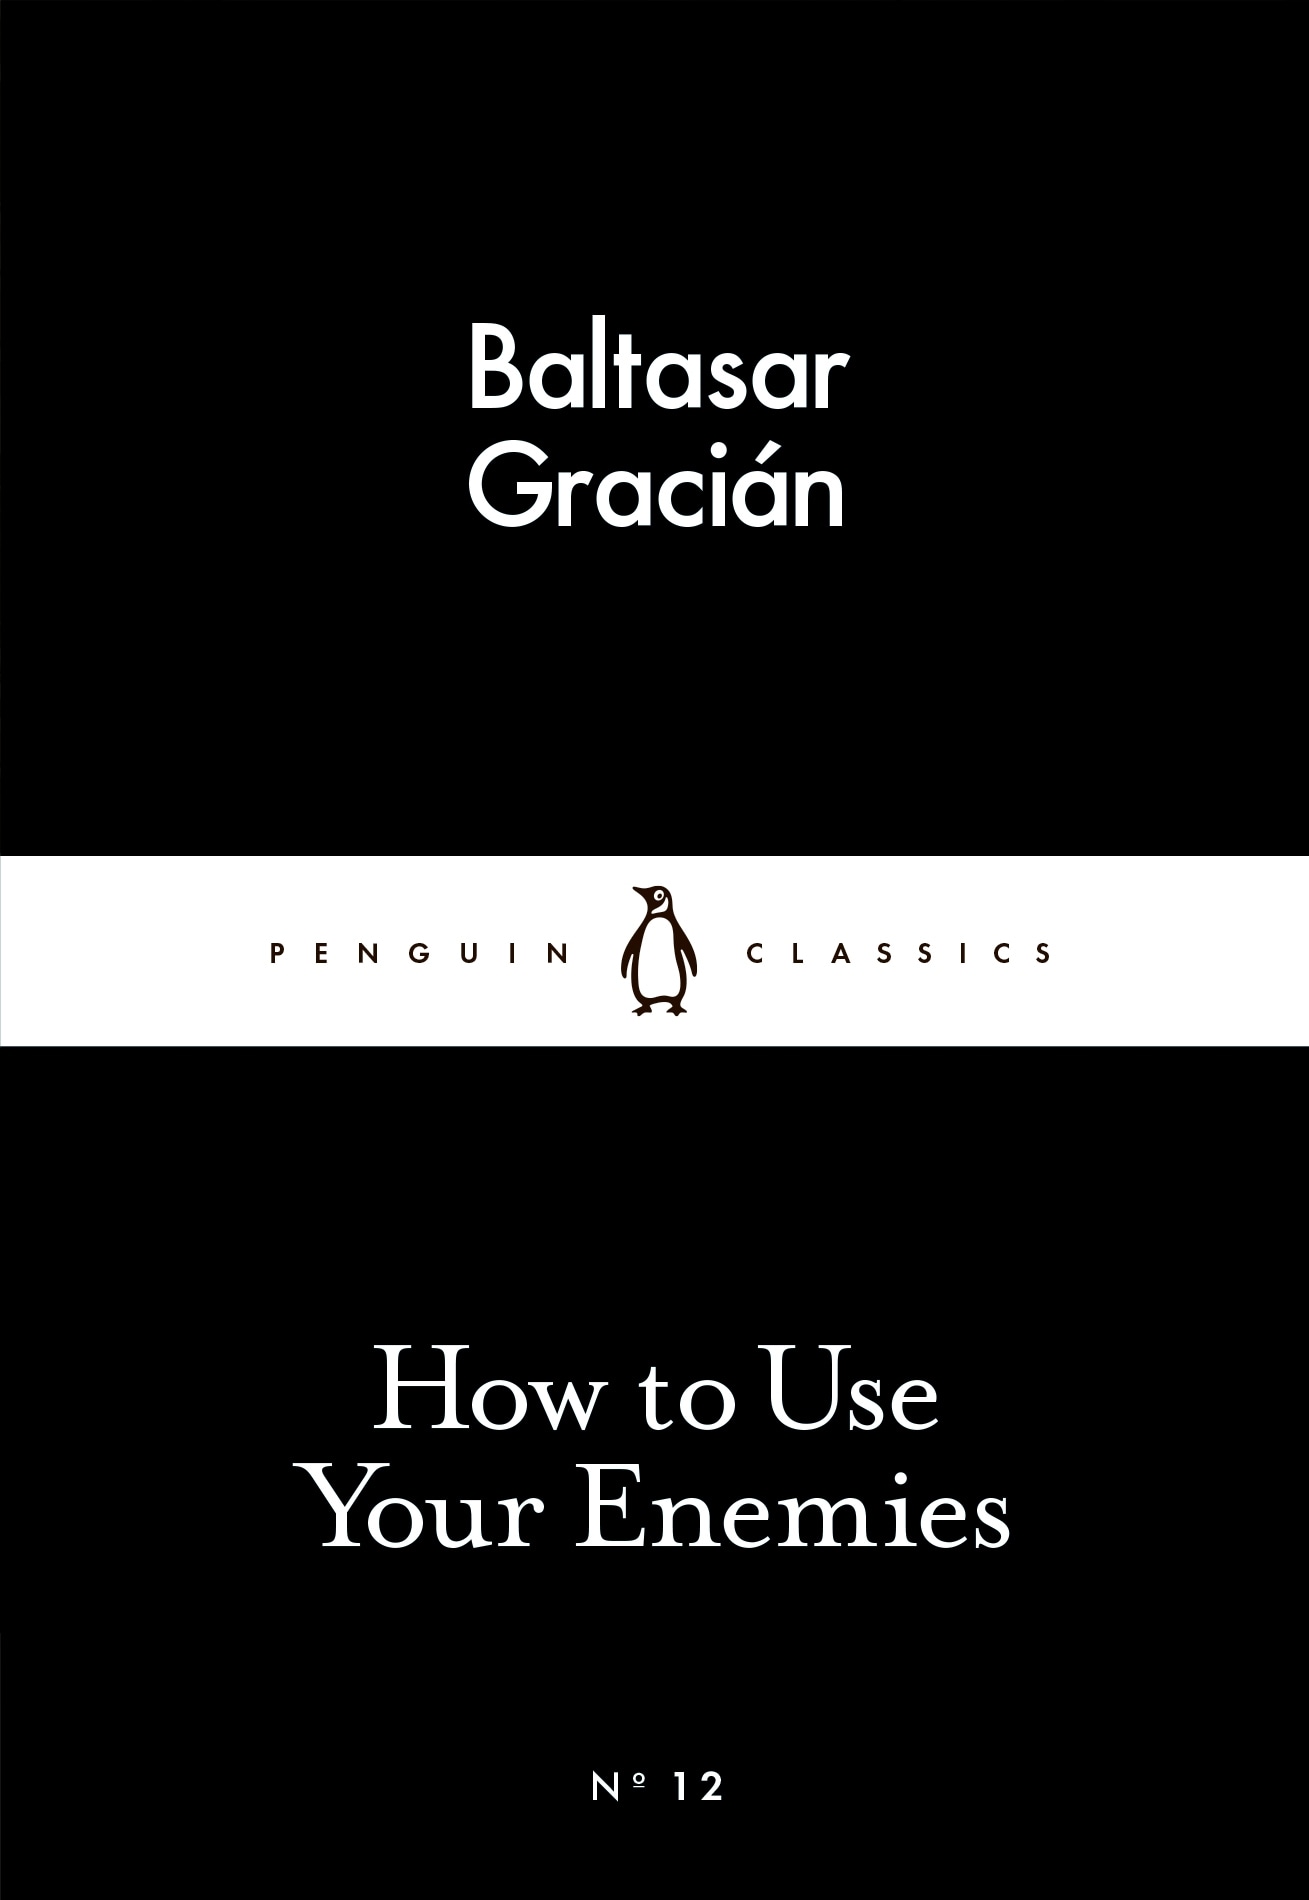 Book “How to Use Your Enemies” by Baltasar Gracián — February 26, 2015